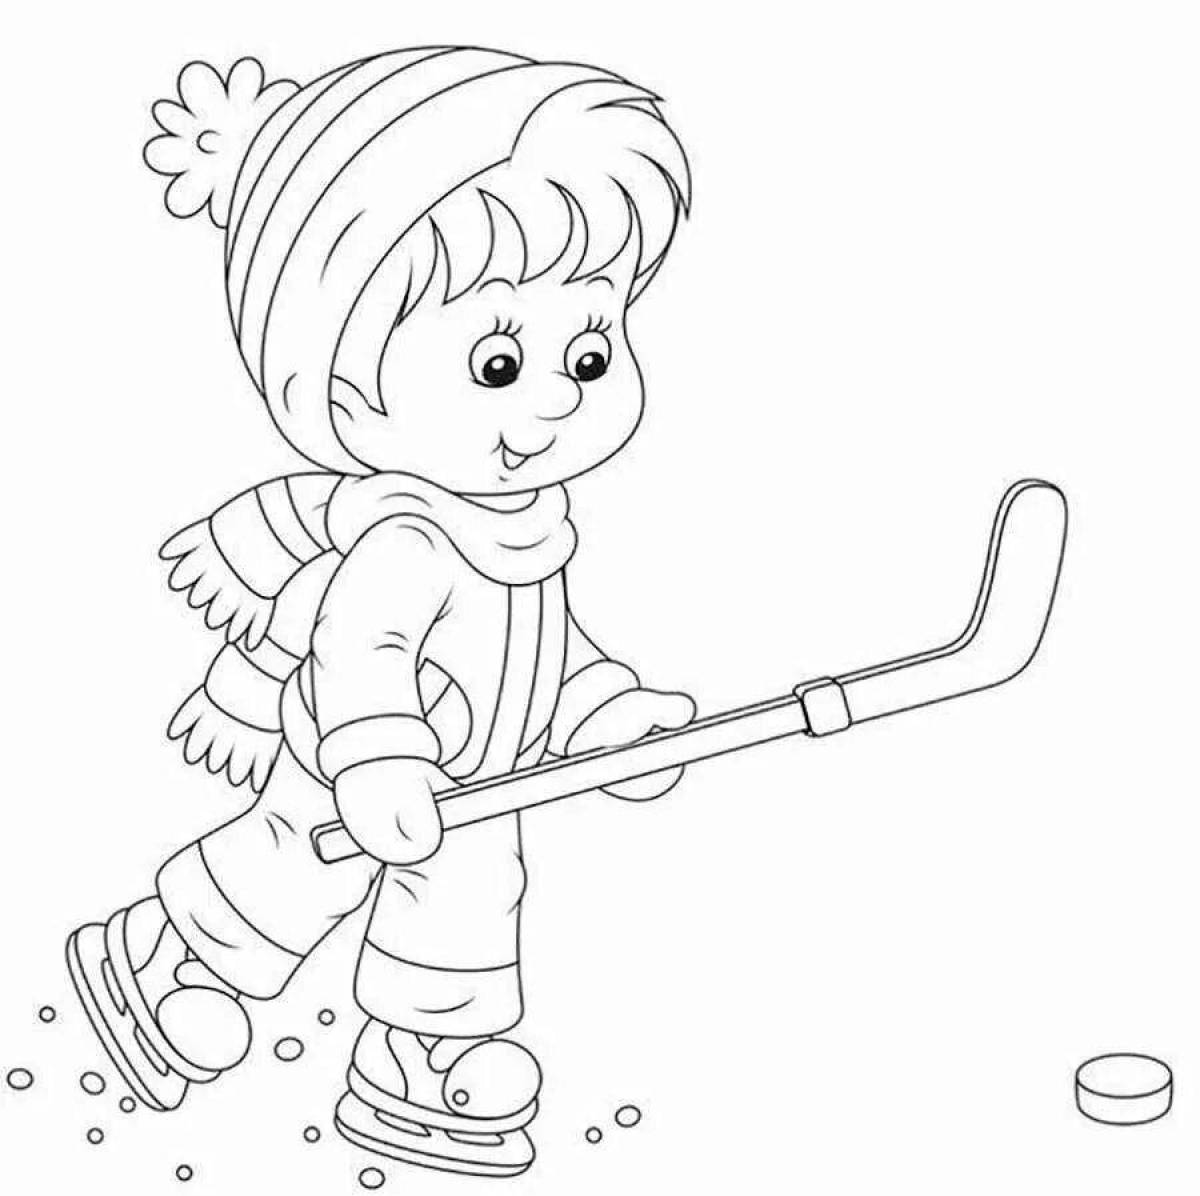 Shiny winter games coloring book